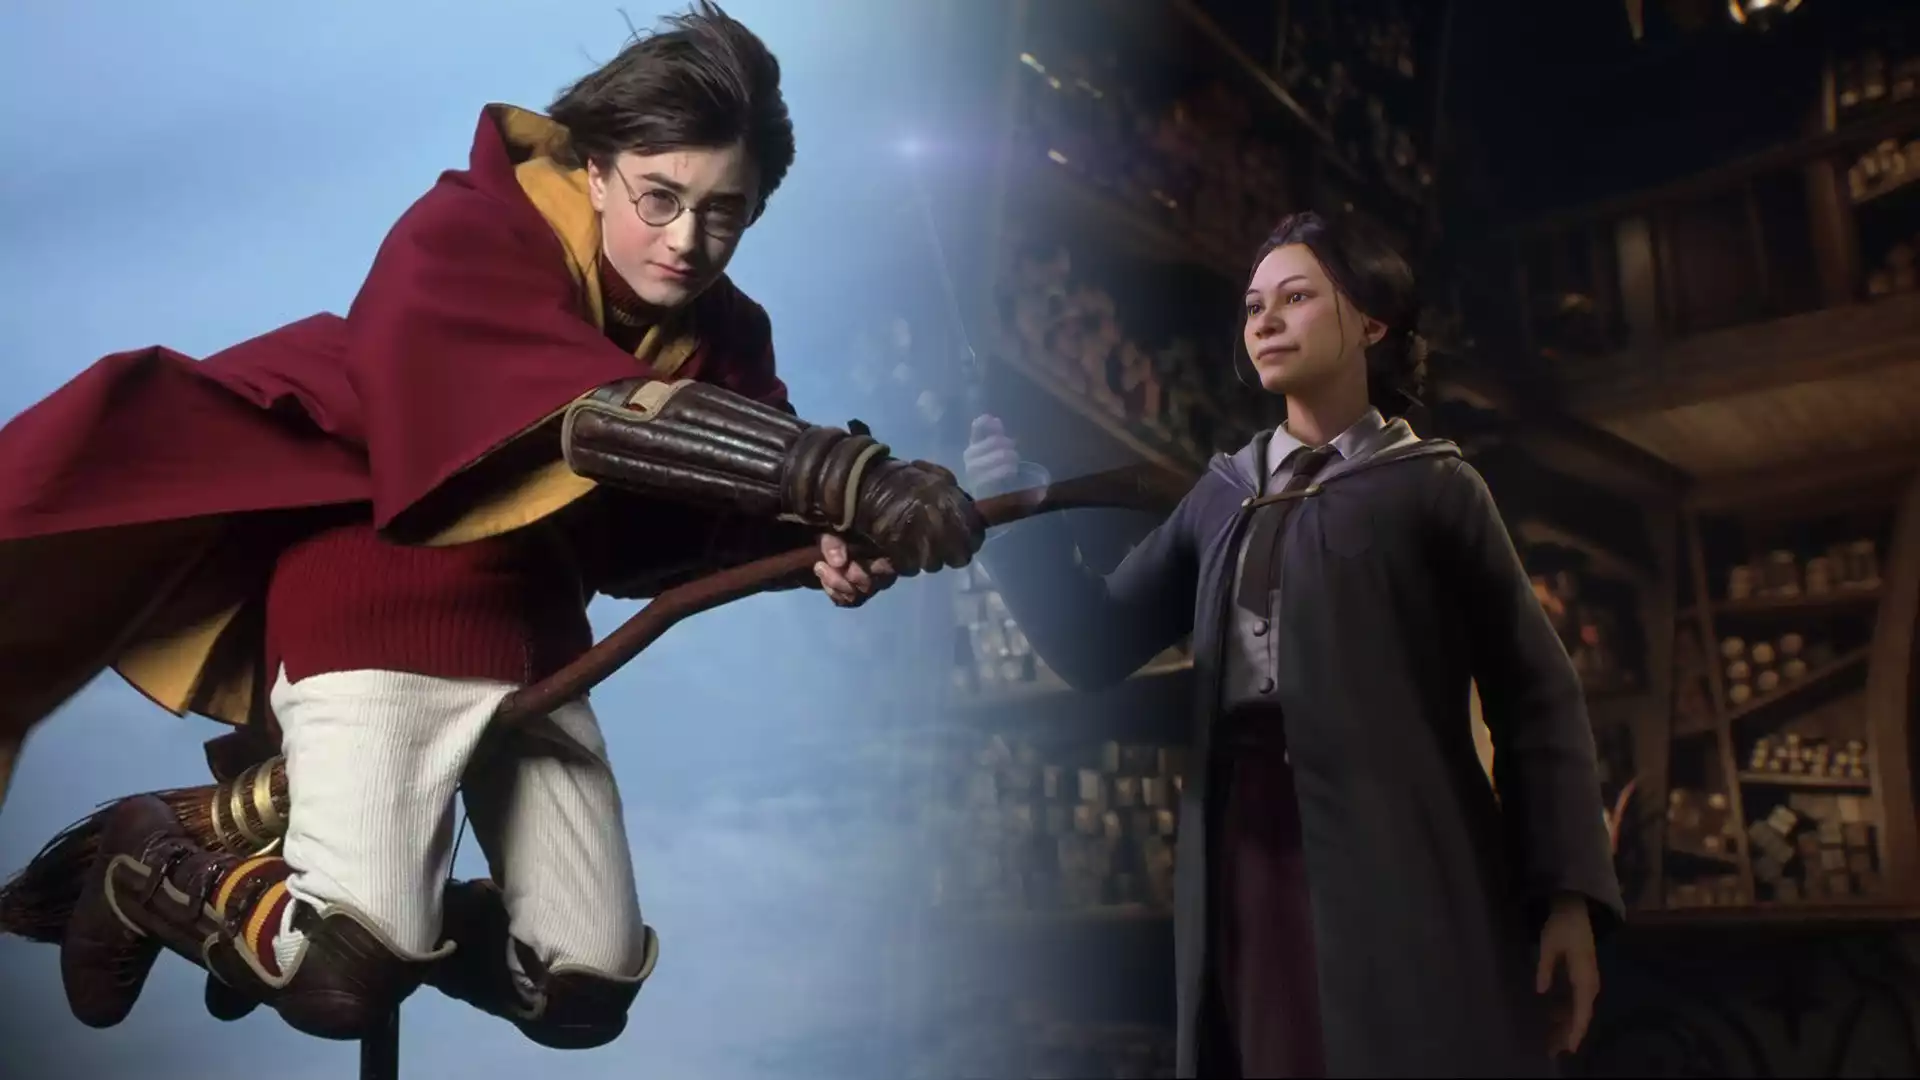 Quidditch Will Not Be Playable In Hogwarts Legacy